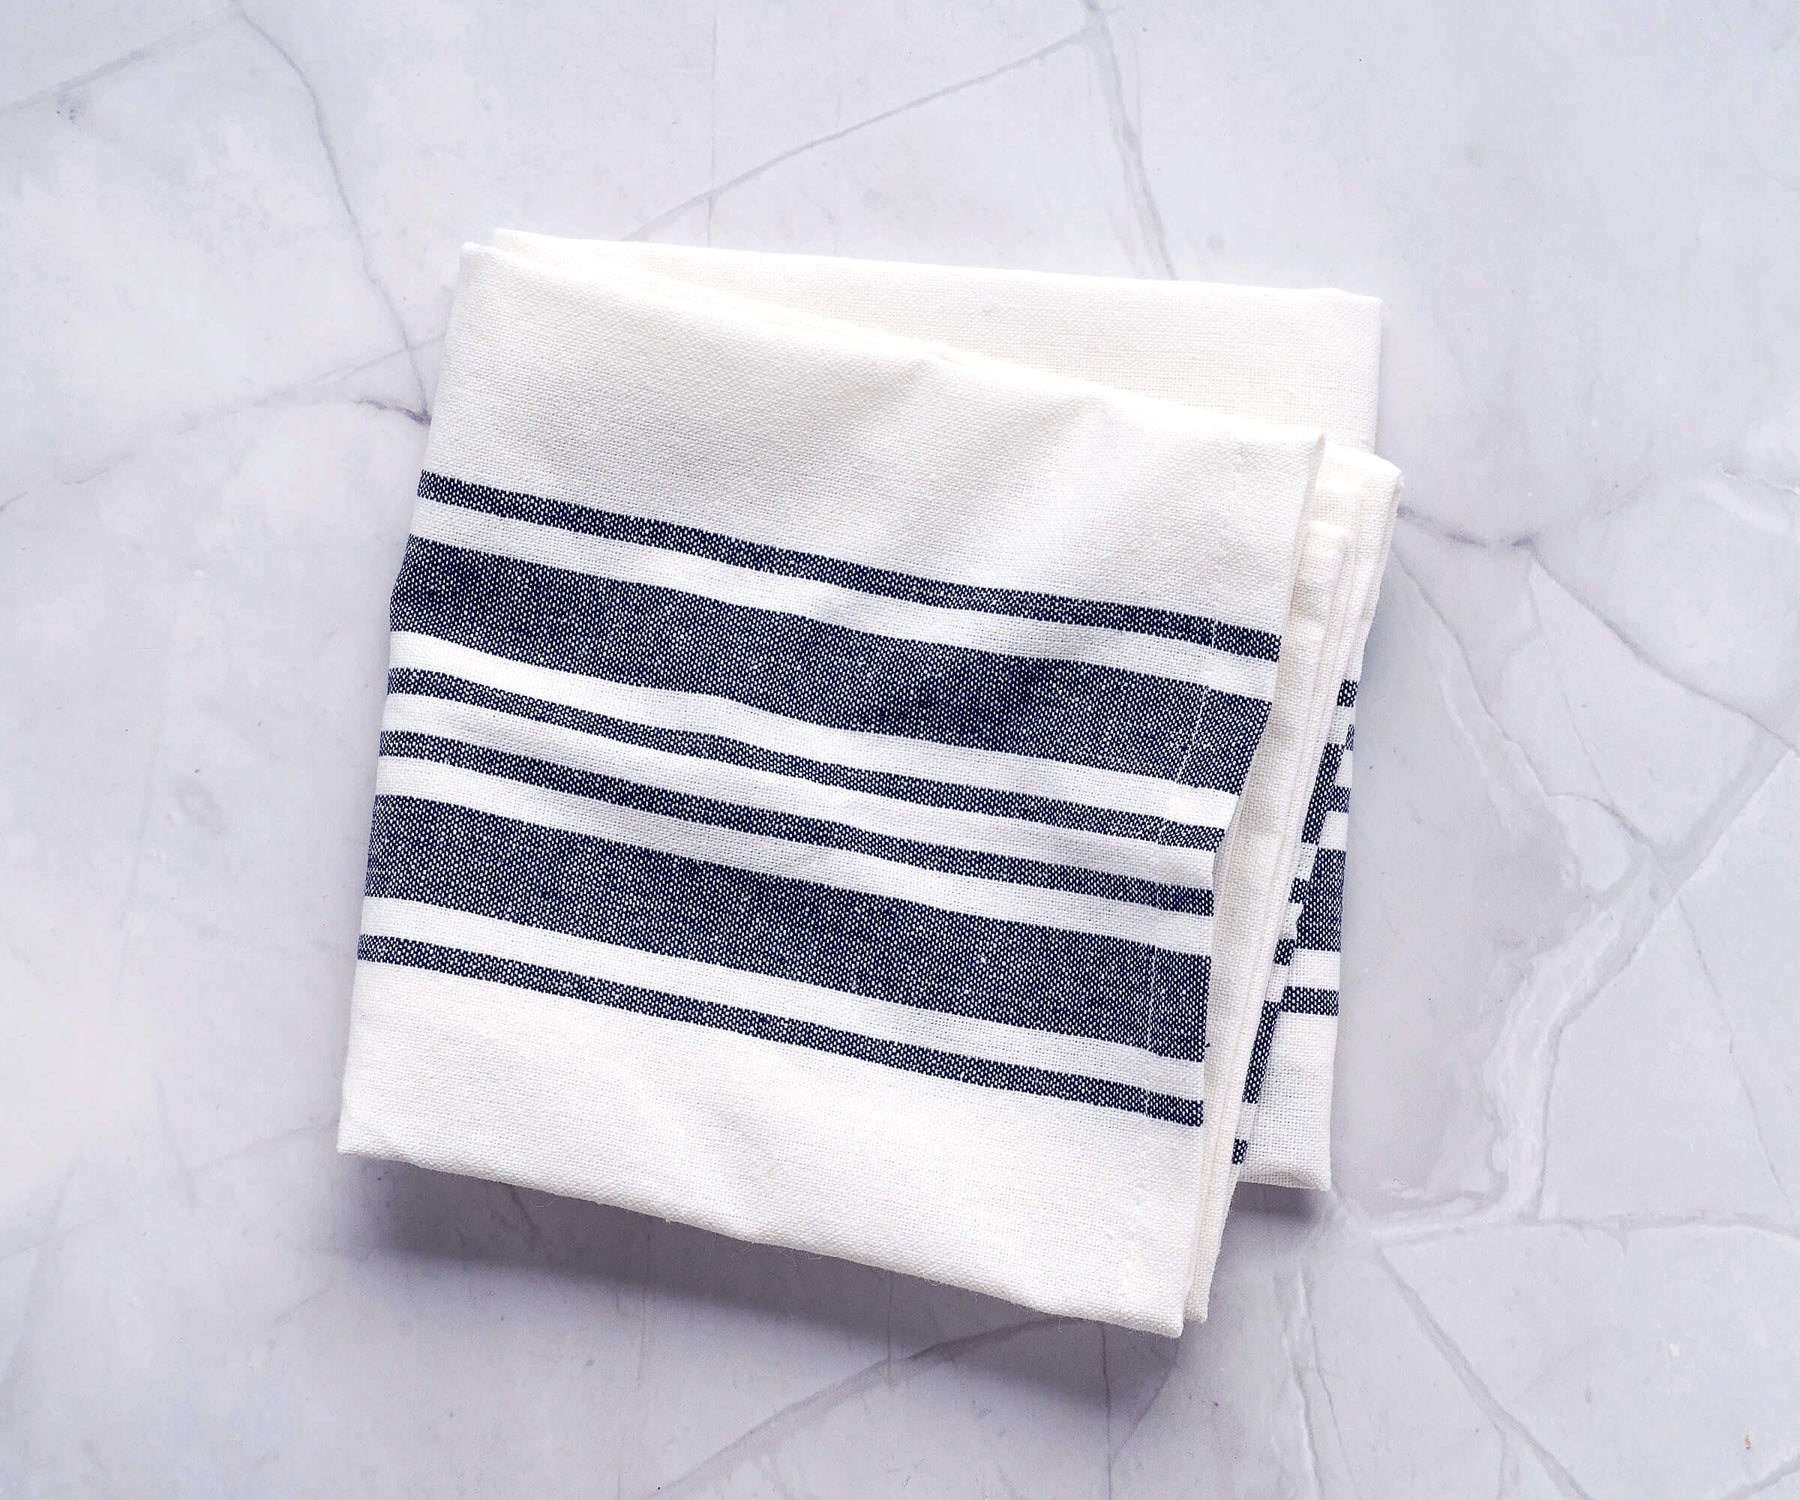 Black and white striped kitchen towel draped over a marble countertop